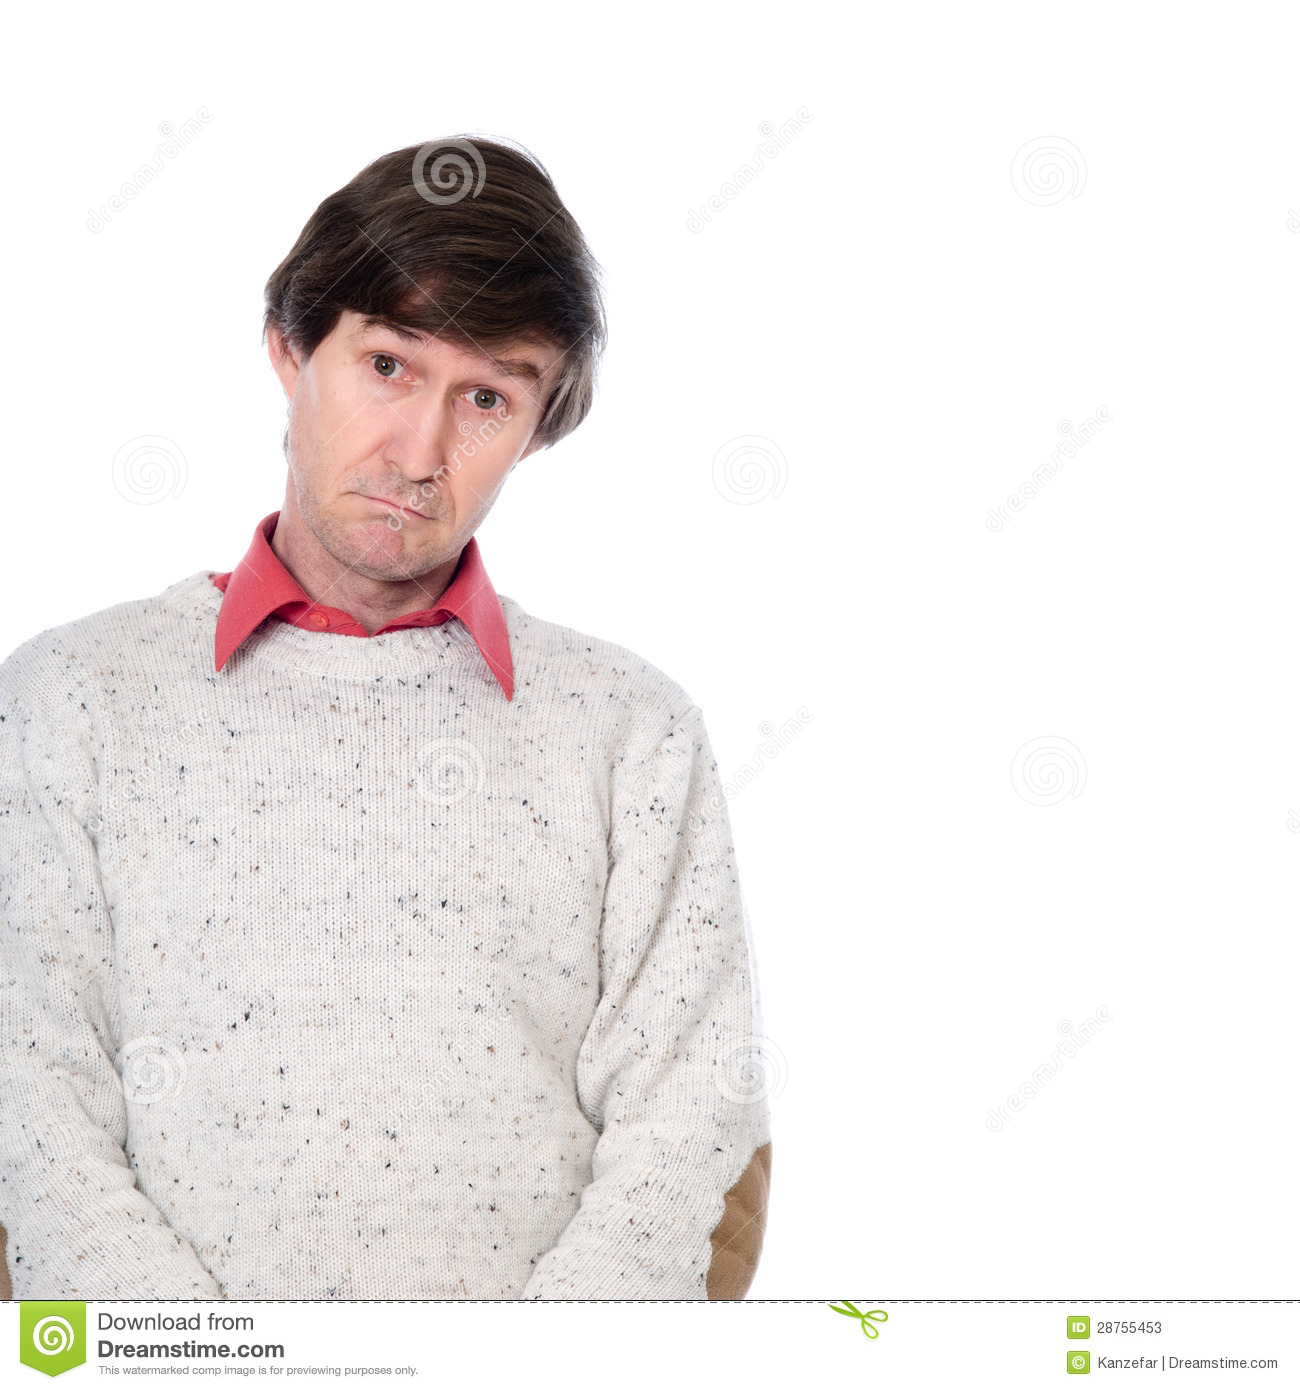     Photos  Portrait Of A Man In A Sweater With A Stupid Look On His Face